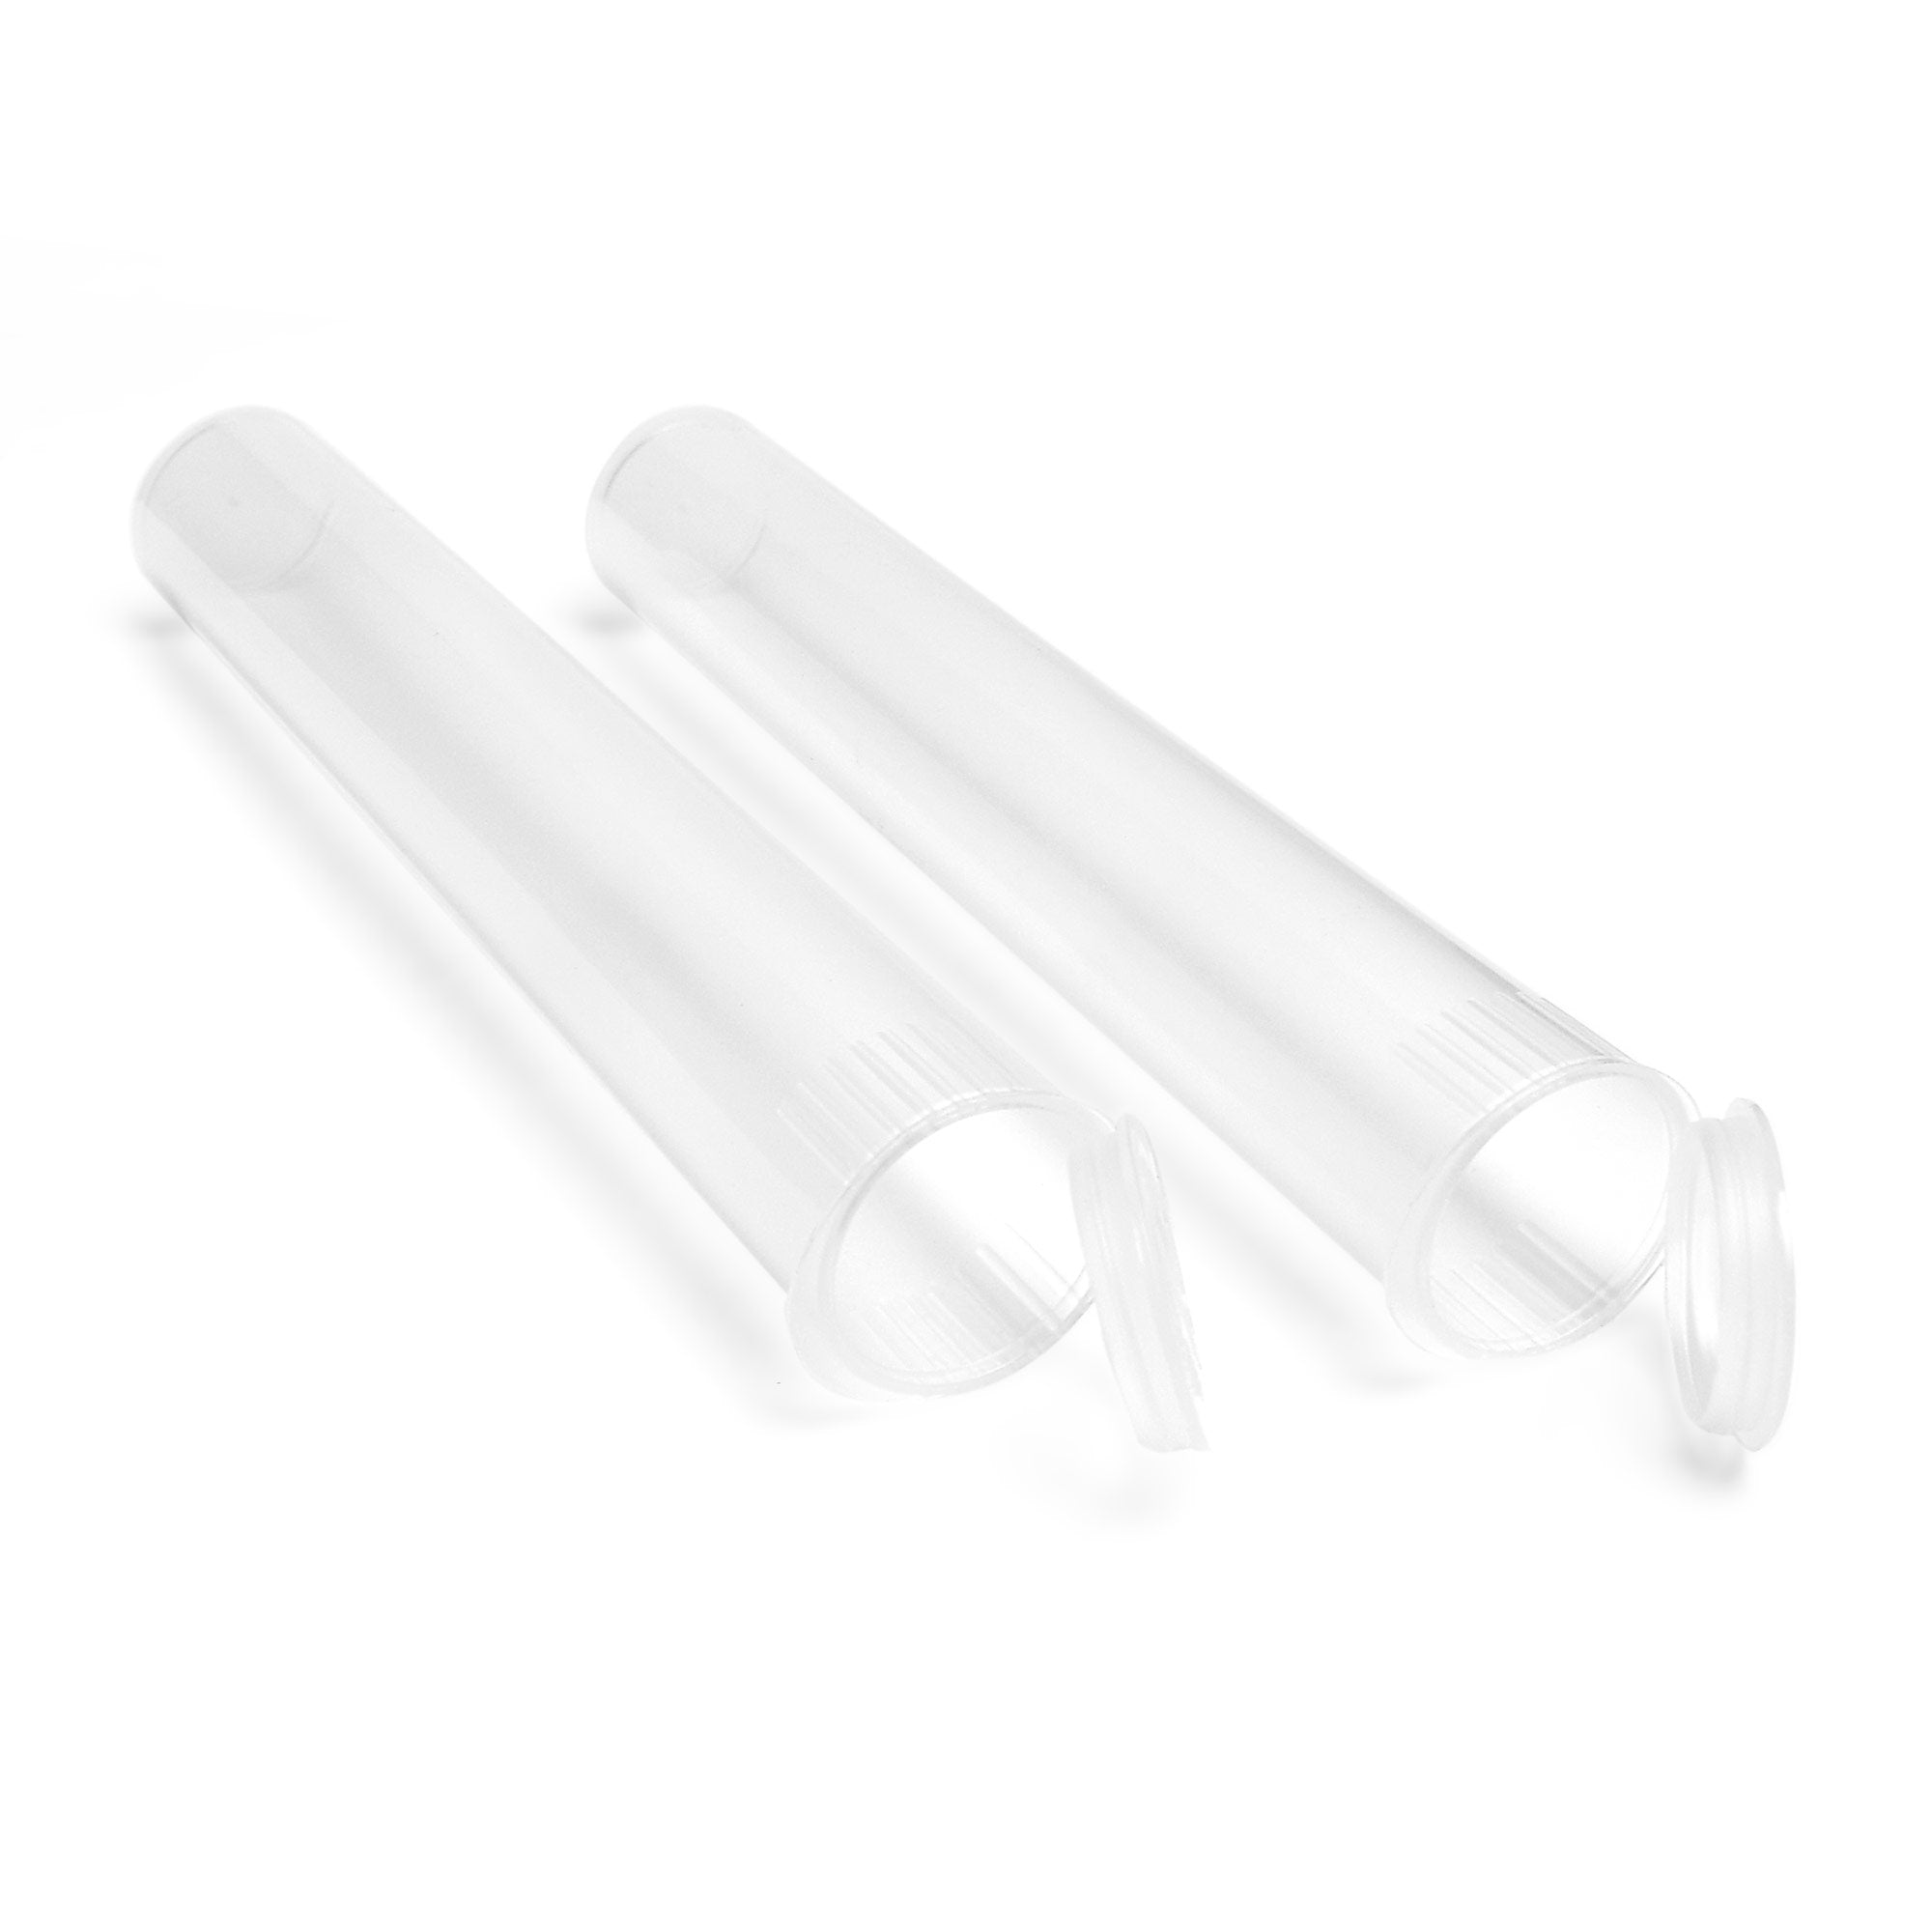 120mm Rx Squeeze Tubes Translucent Clear - 500 Count